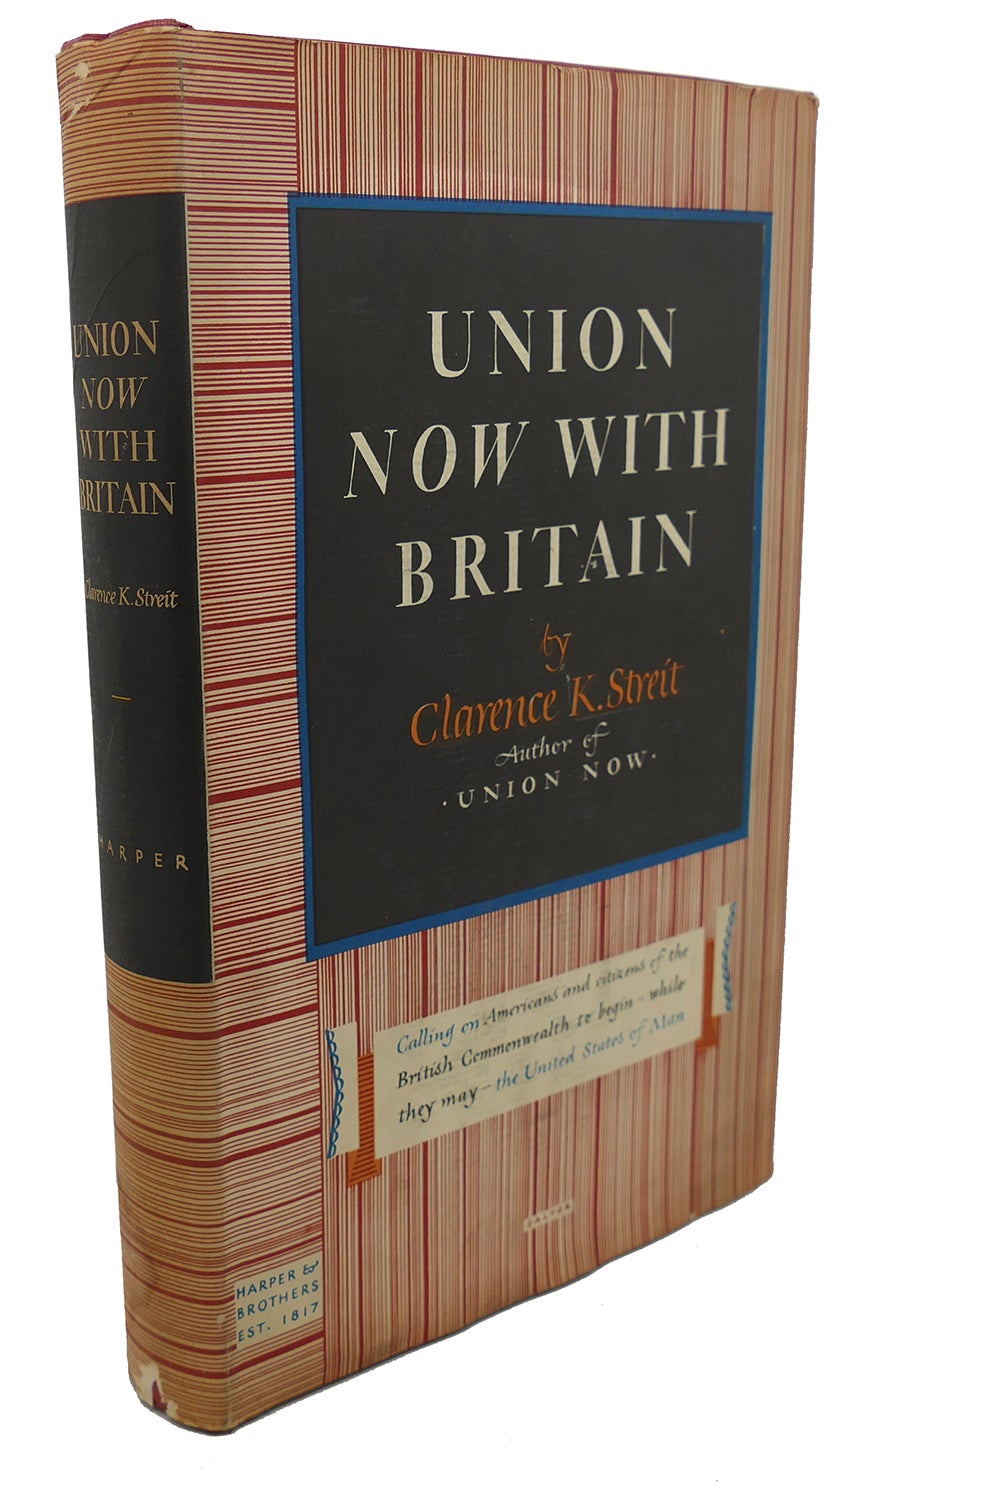 UNION NOW WITH BRITAIN | Clarence K. Streit | Book Club Edition